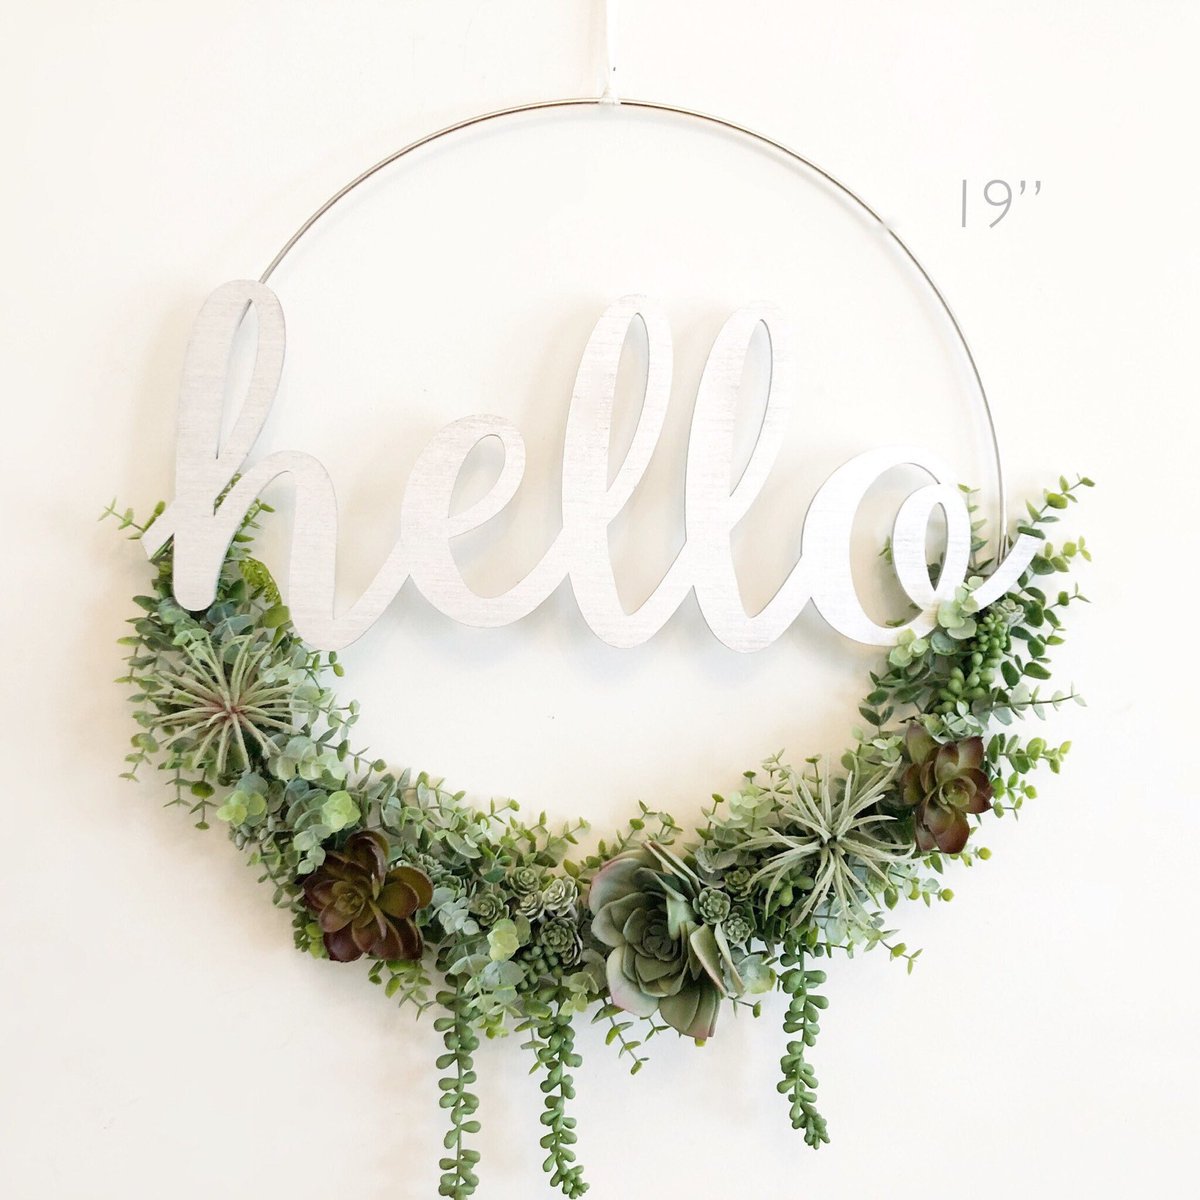 Excited to share this item from my #etsy shop: 19' Succulent Wreath, Modern Hoop Wreath With Faux Hoop Wreath #mothersday #housewarming #farmhousewreath #lasercutwood #succulentwreath #airplants #wreathsucculents #greensucculents #modernhomedecor etsy.me/3g2jBR6